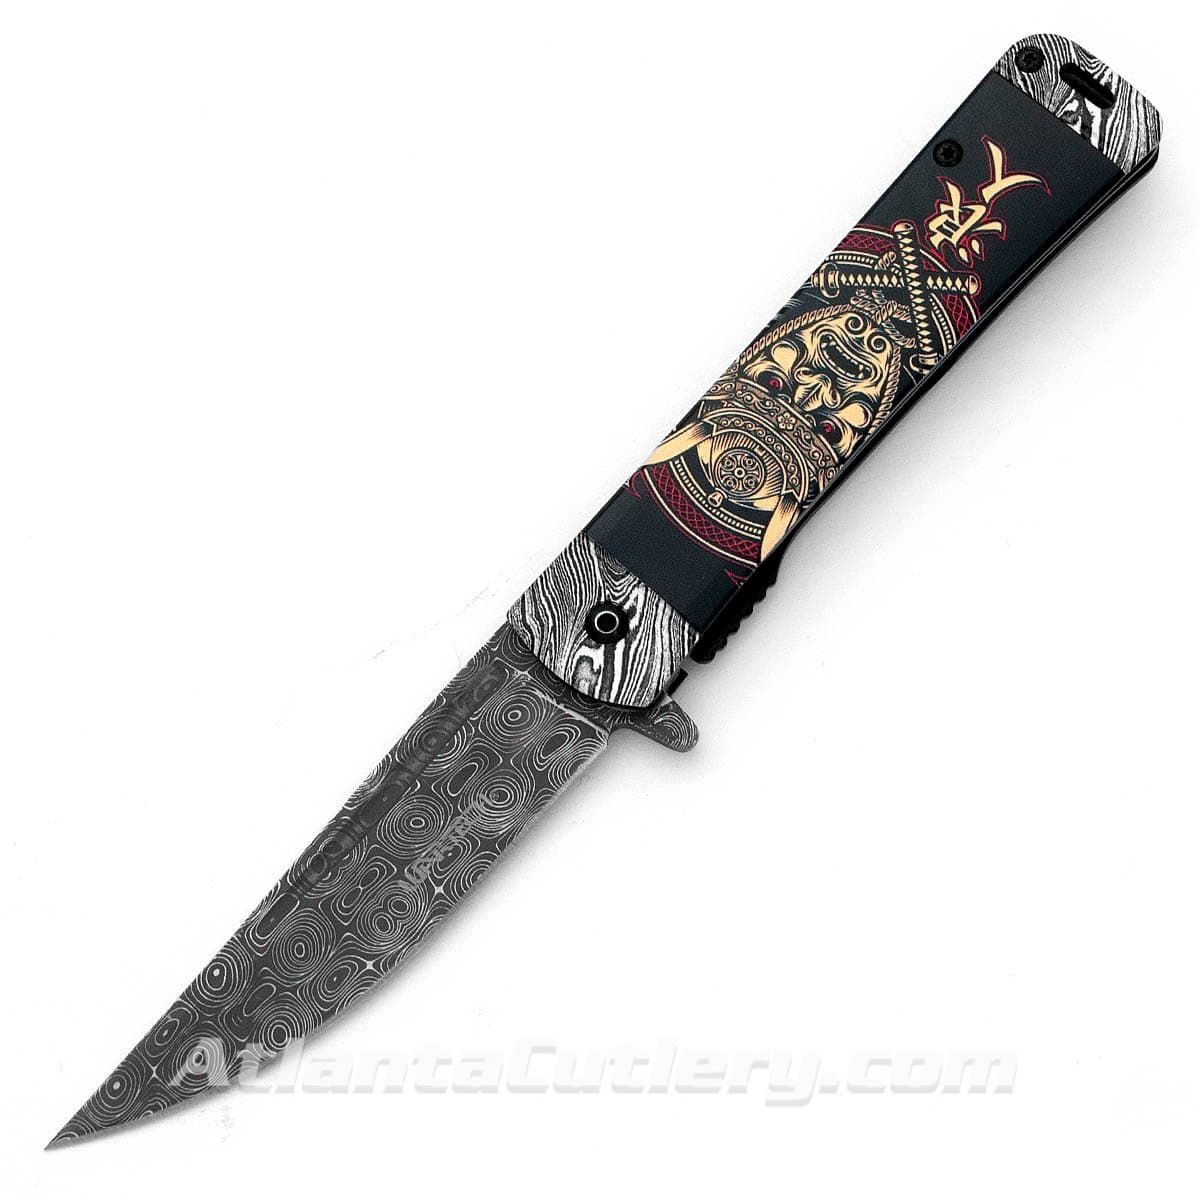 Folder of the Shogun Assisted Opening Knife with Etched Blade